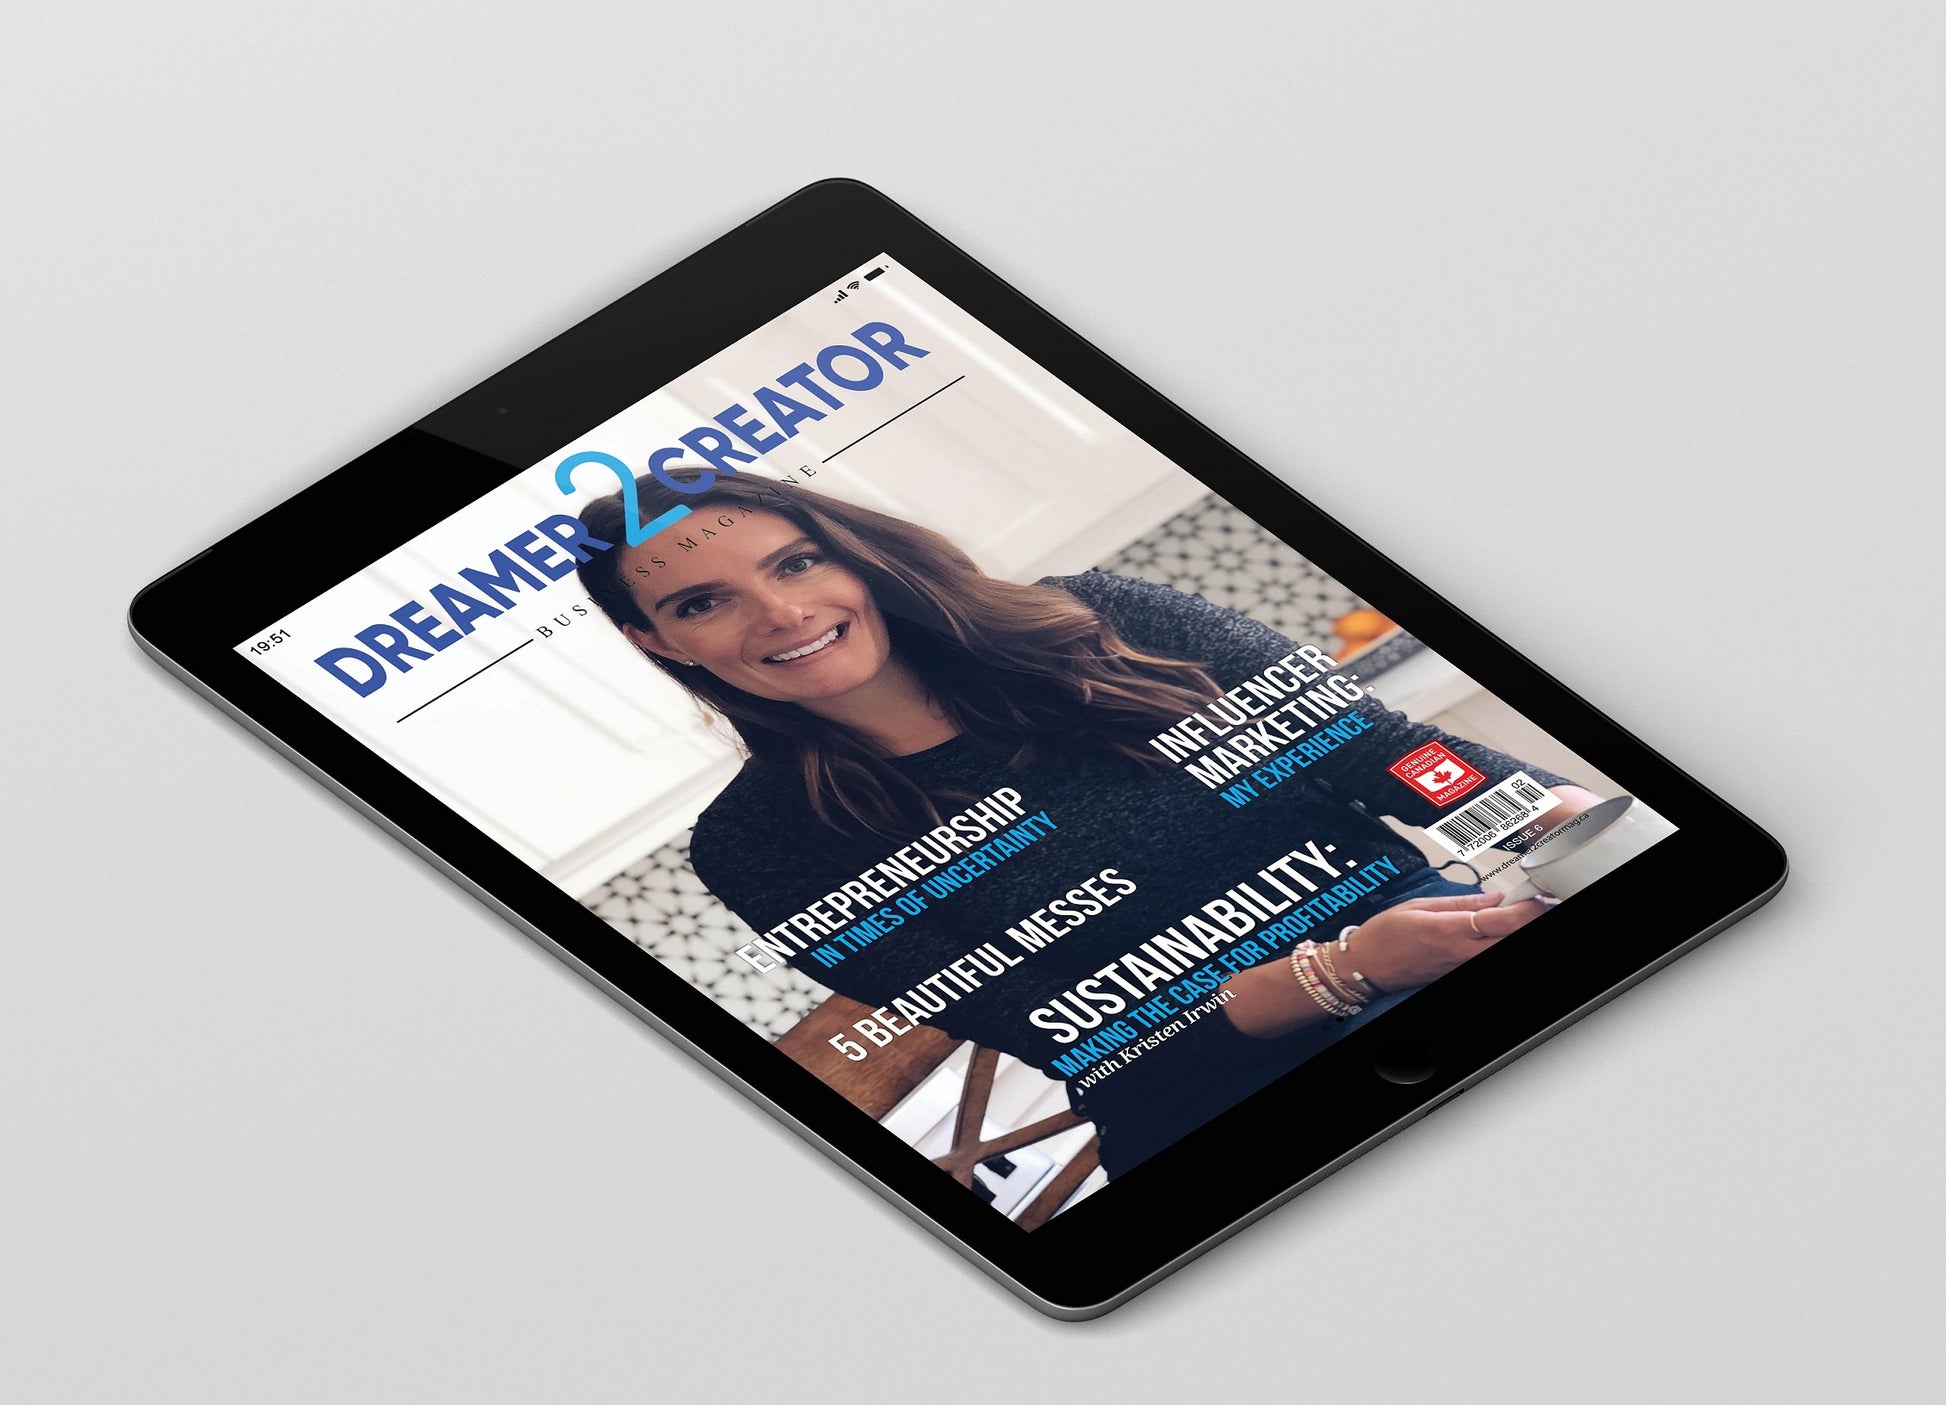 Issue 10 Digital version of Dreamer 2 Creator Business Magazine. Can be read on a tablet, phone or computer. Canadian mirco-entrepreneur lady.